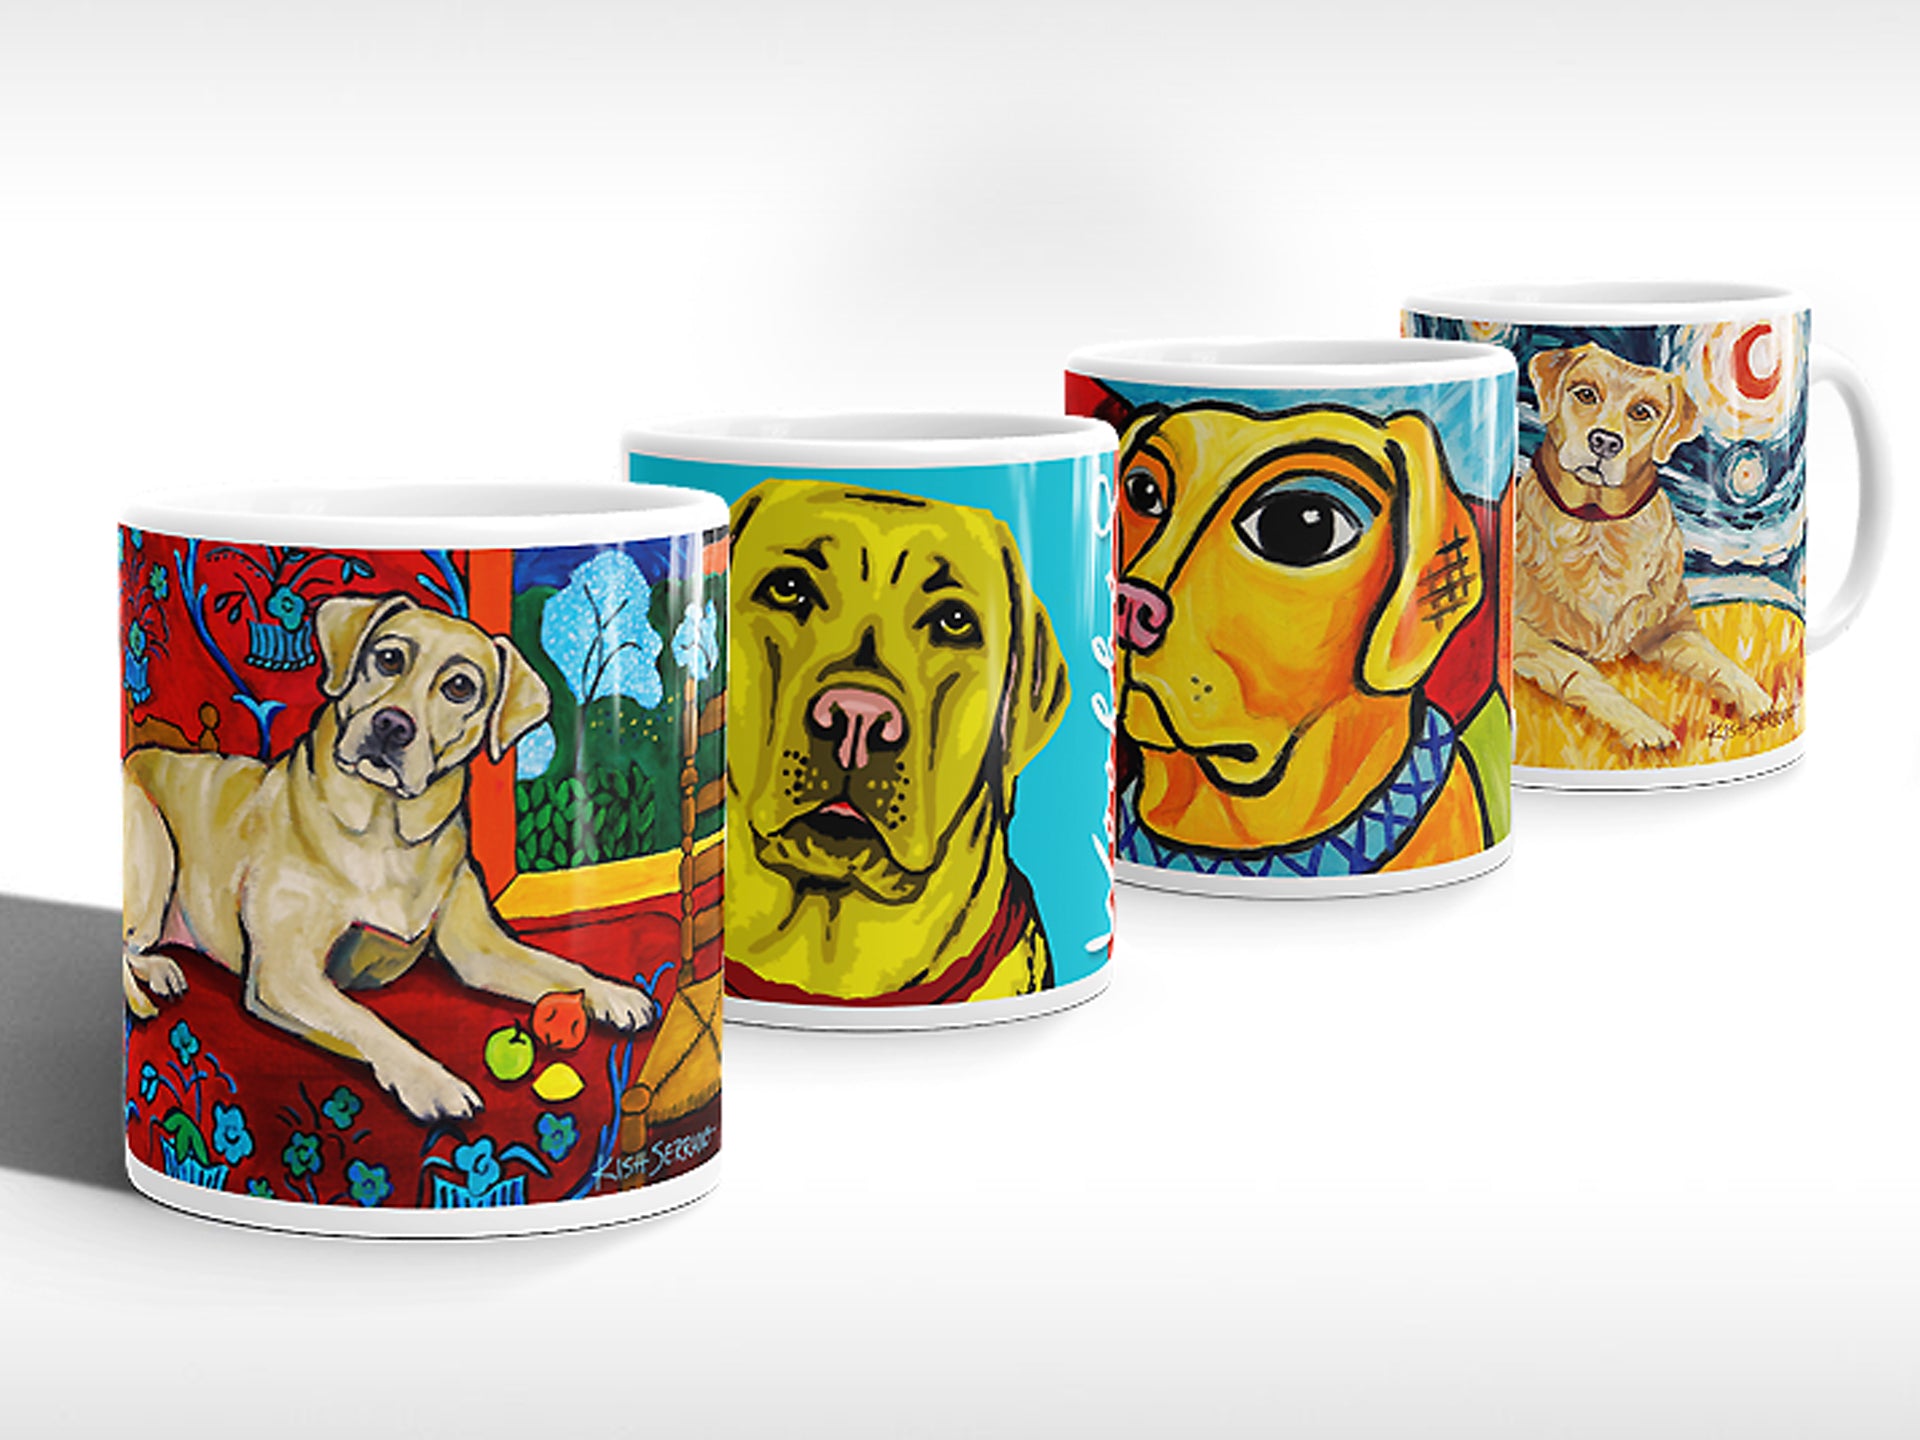 Yellow labrador dog art collection in coffee mugs inspired by Matisse, Warhol, Picasso and Van Gogh..